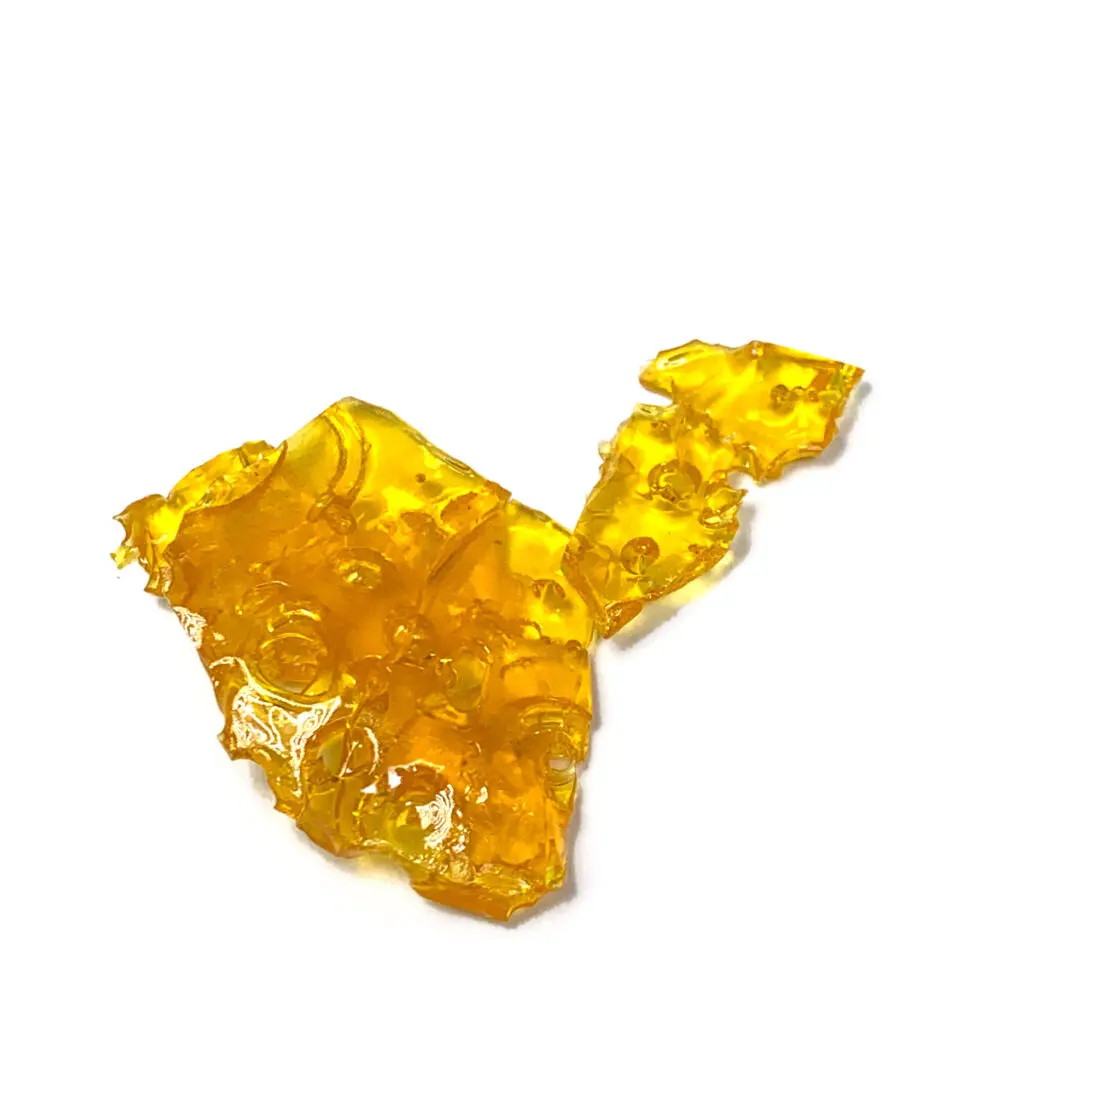 Xo Premium Concentrates – Shatter (2g) – Moby Dick